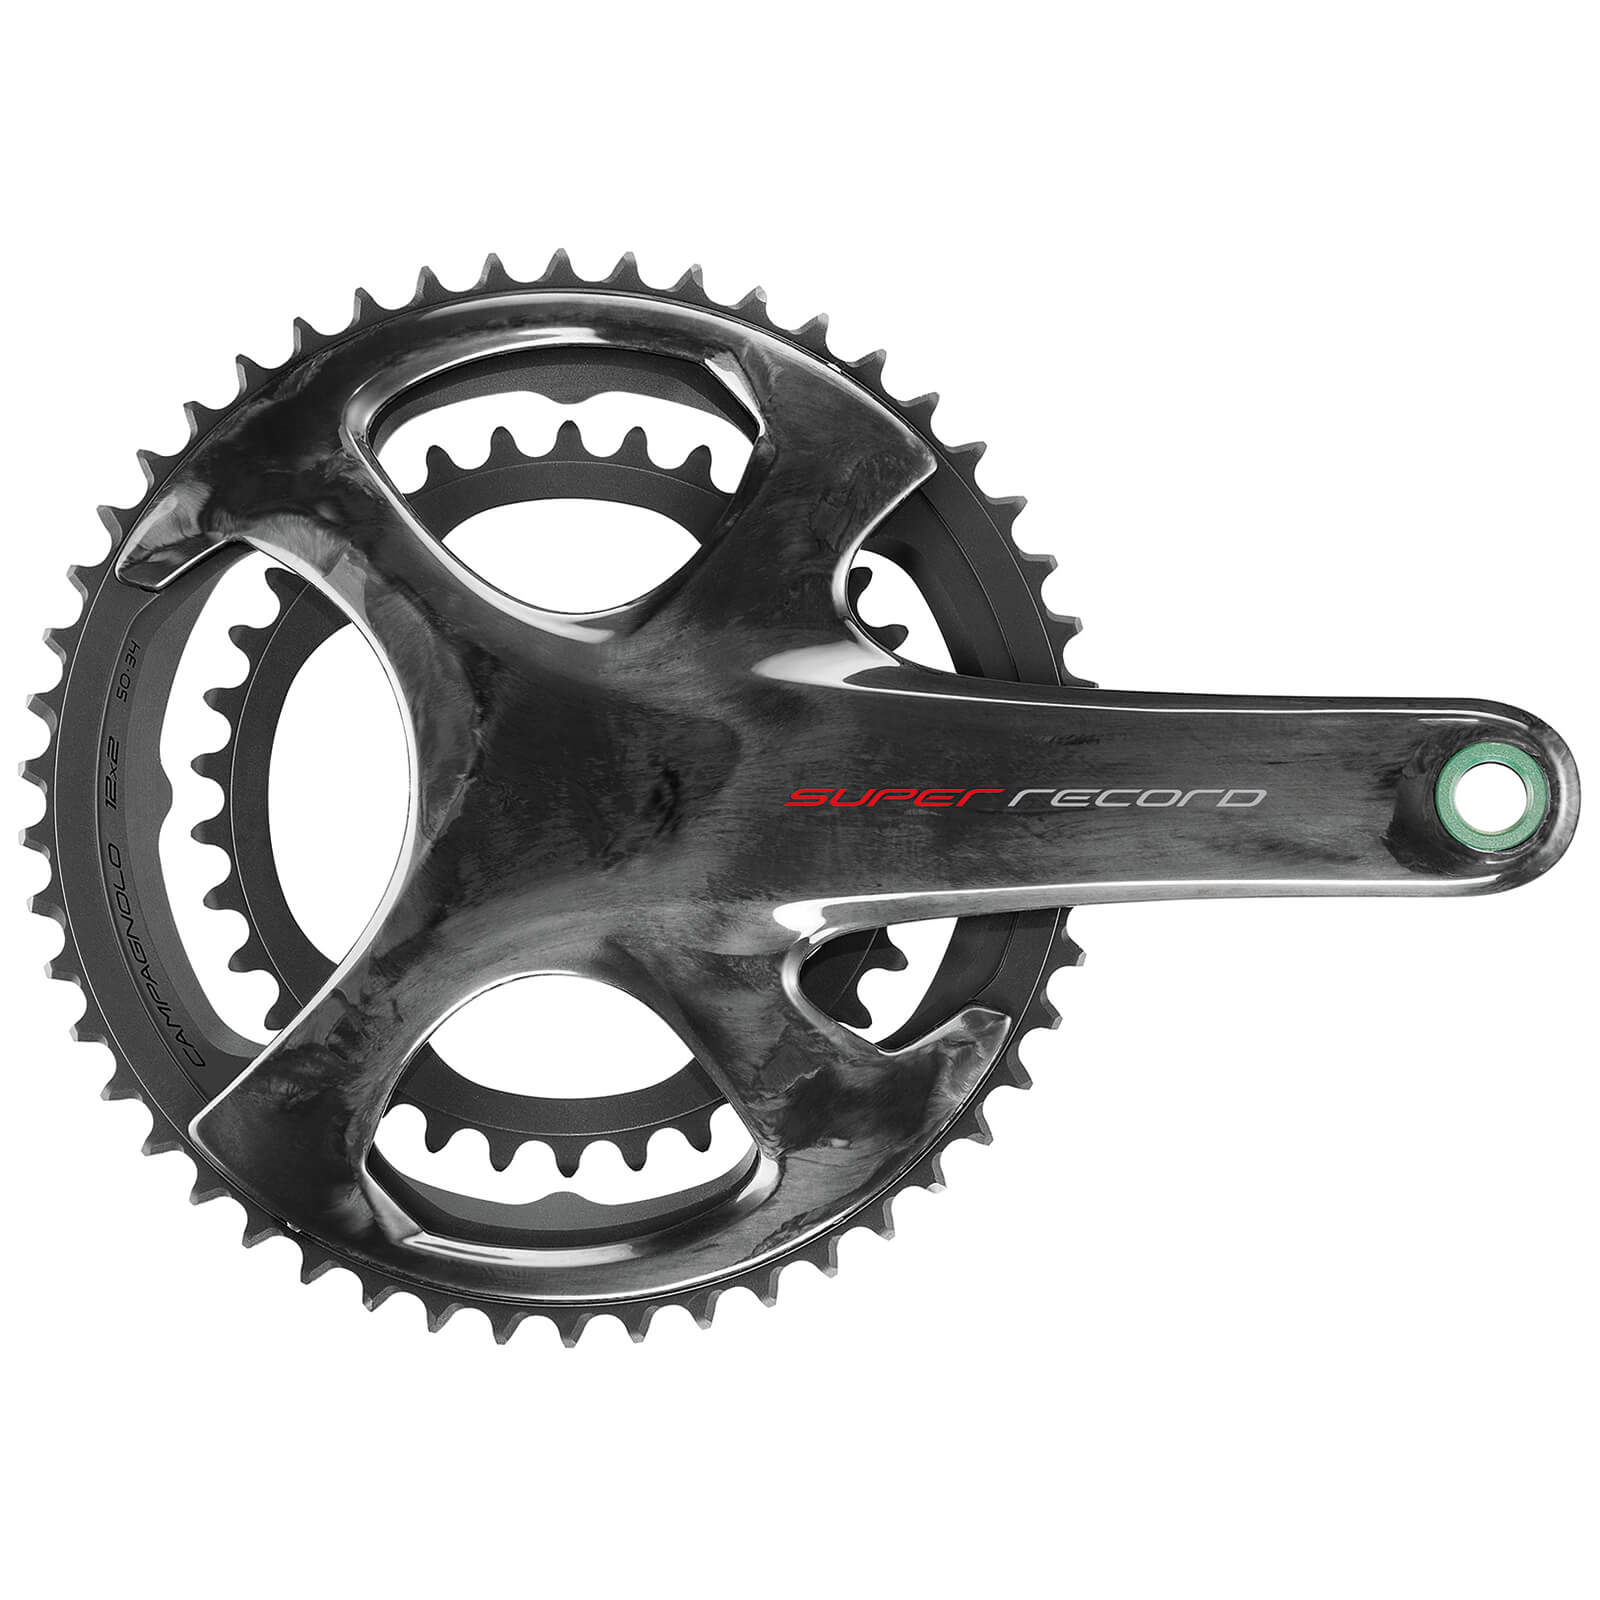 Campagnolo Super Record UT TI Carbon 12 Speed Chainset - 52-36T - 170mm